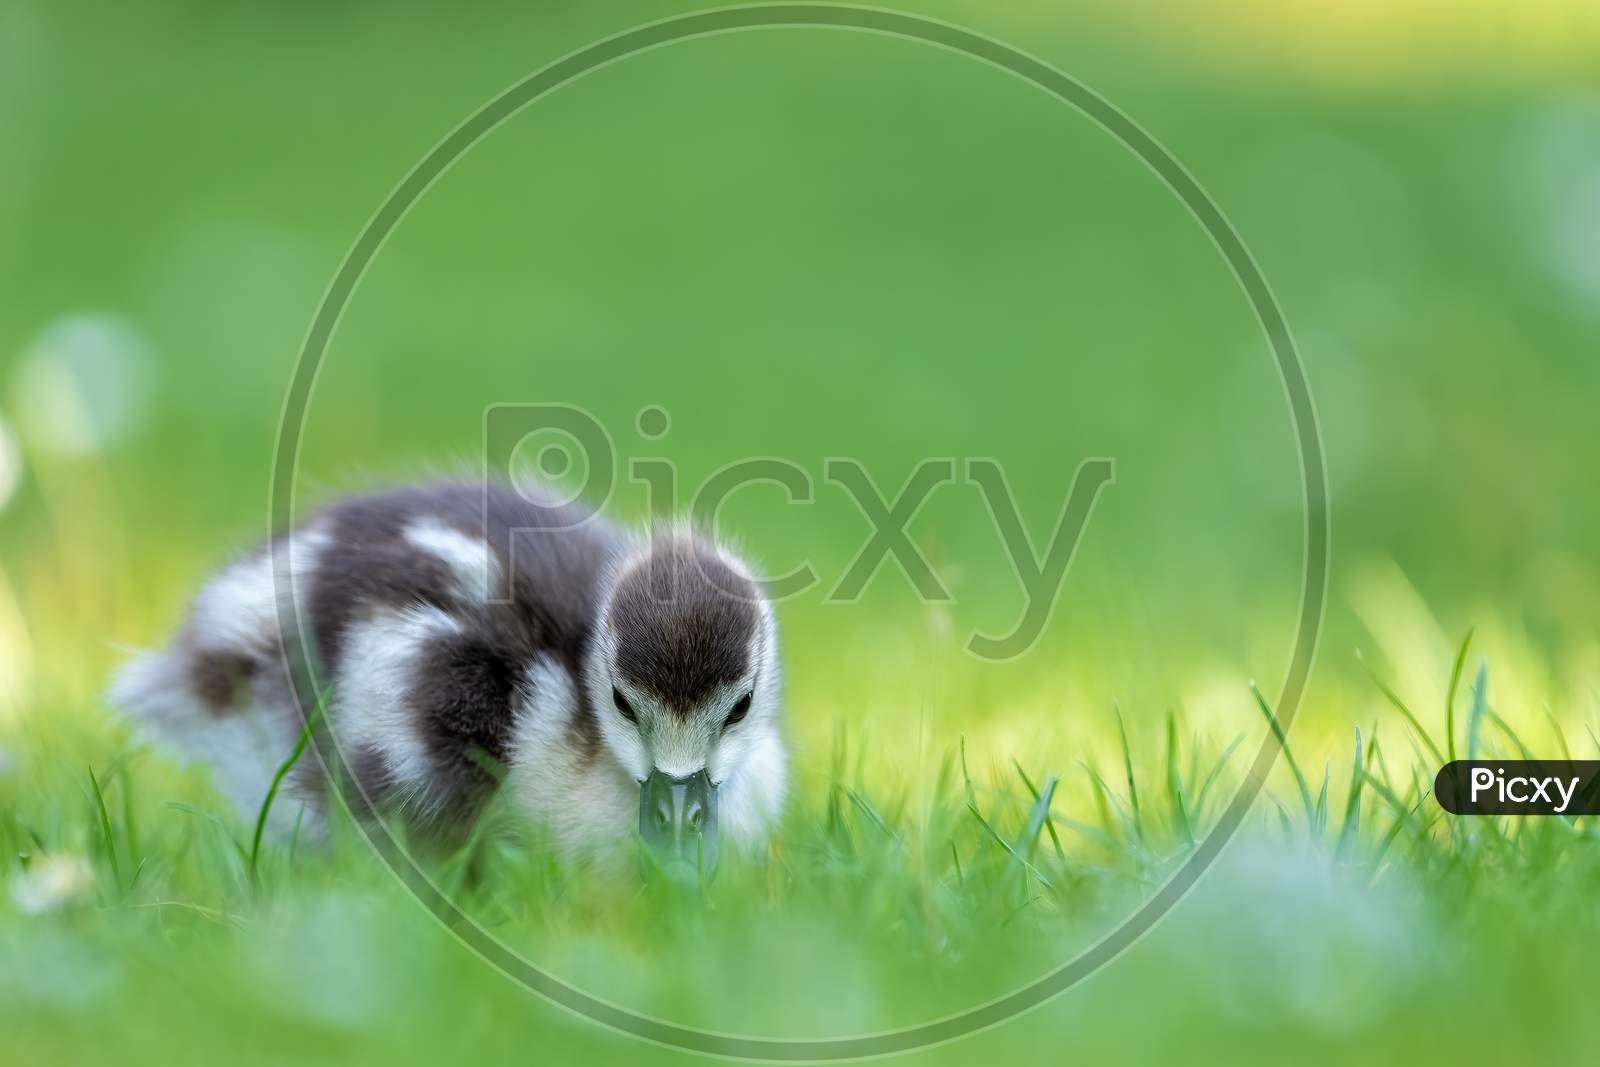 Cute Egyptian goose chicks walking on a meadow at the so called Kalscheurer Weiher, a pond in Cologne, Germany at a sunny day in summer.